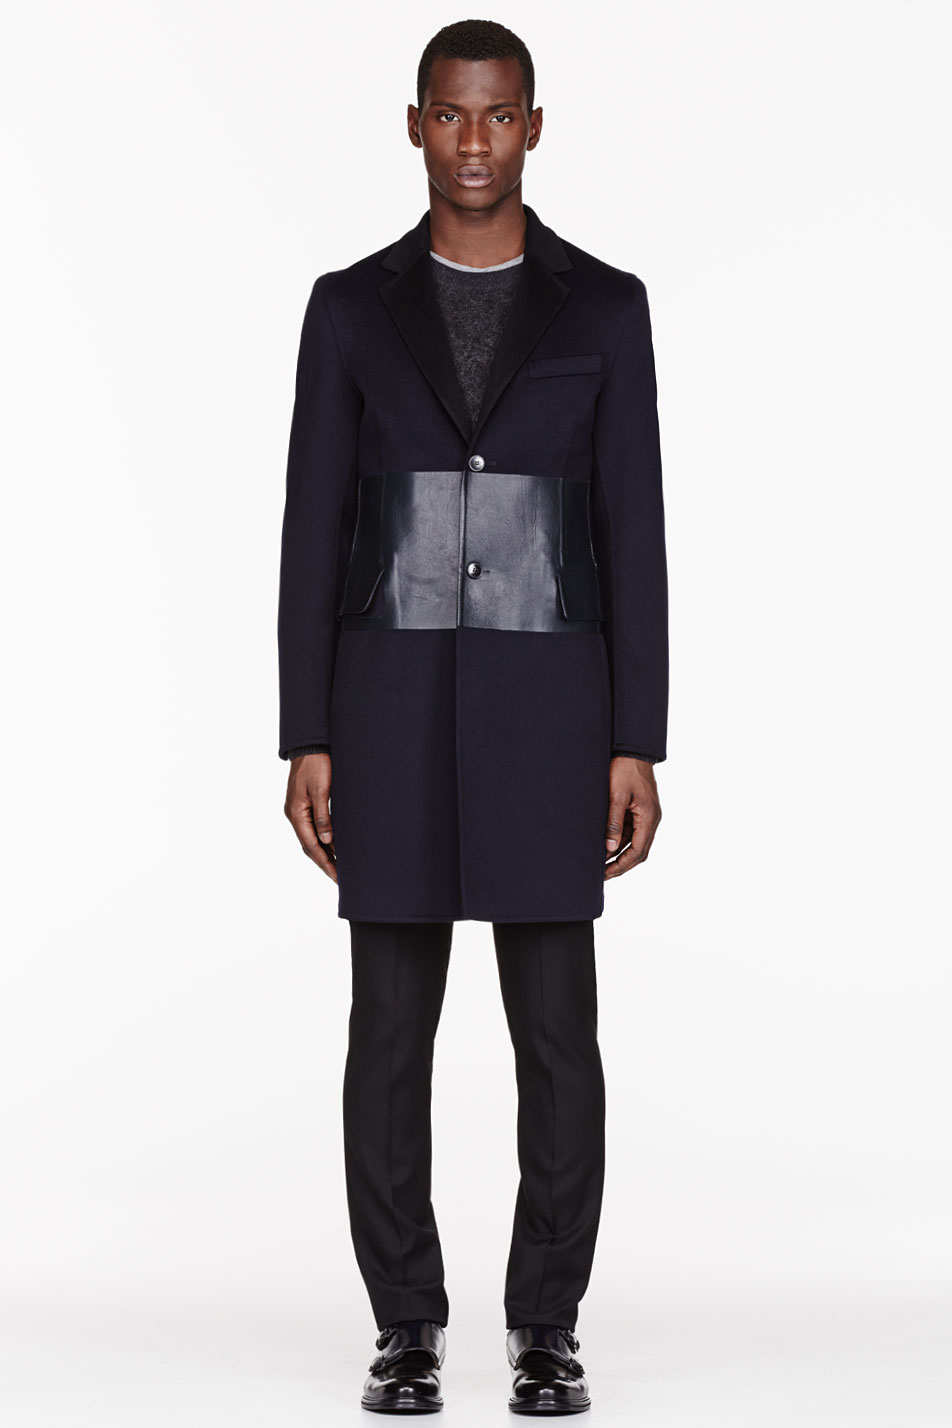 Lyst - Valentino Navy Wool and Bonded Leather Coat in Blue for Men